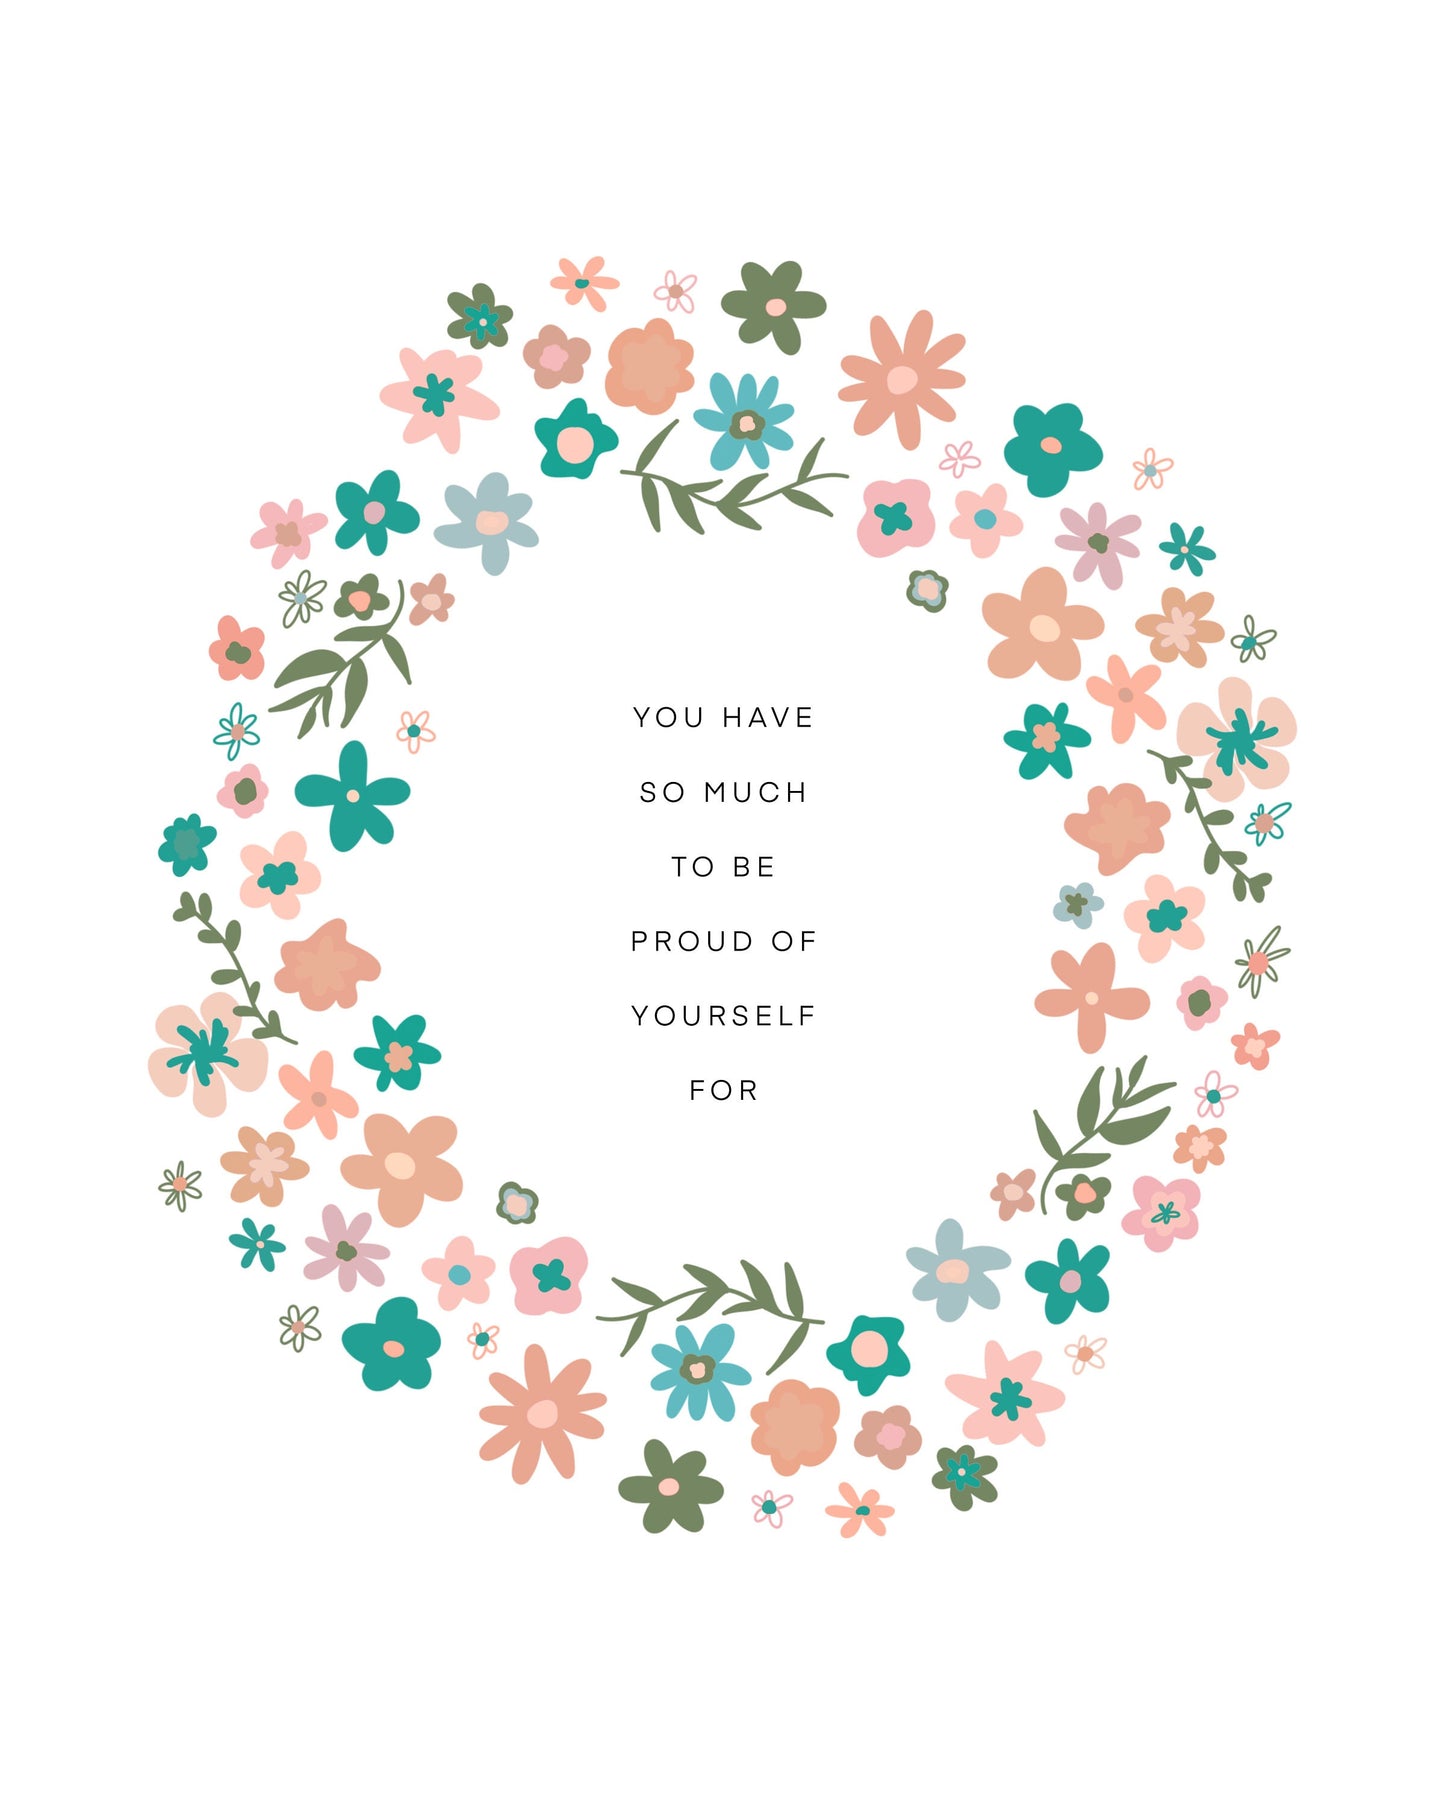 You Have So Much To Be Proud Of Yourself For Flower Wreath || Inspirational || Quote Art || Inspirational Quote ||| 8x10 Print Unframed